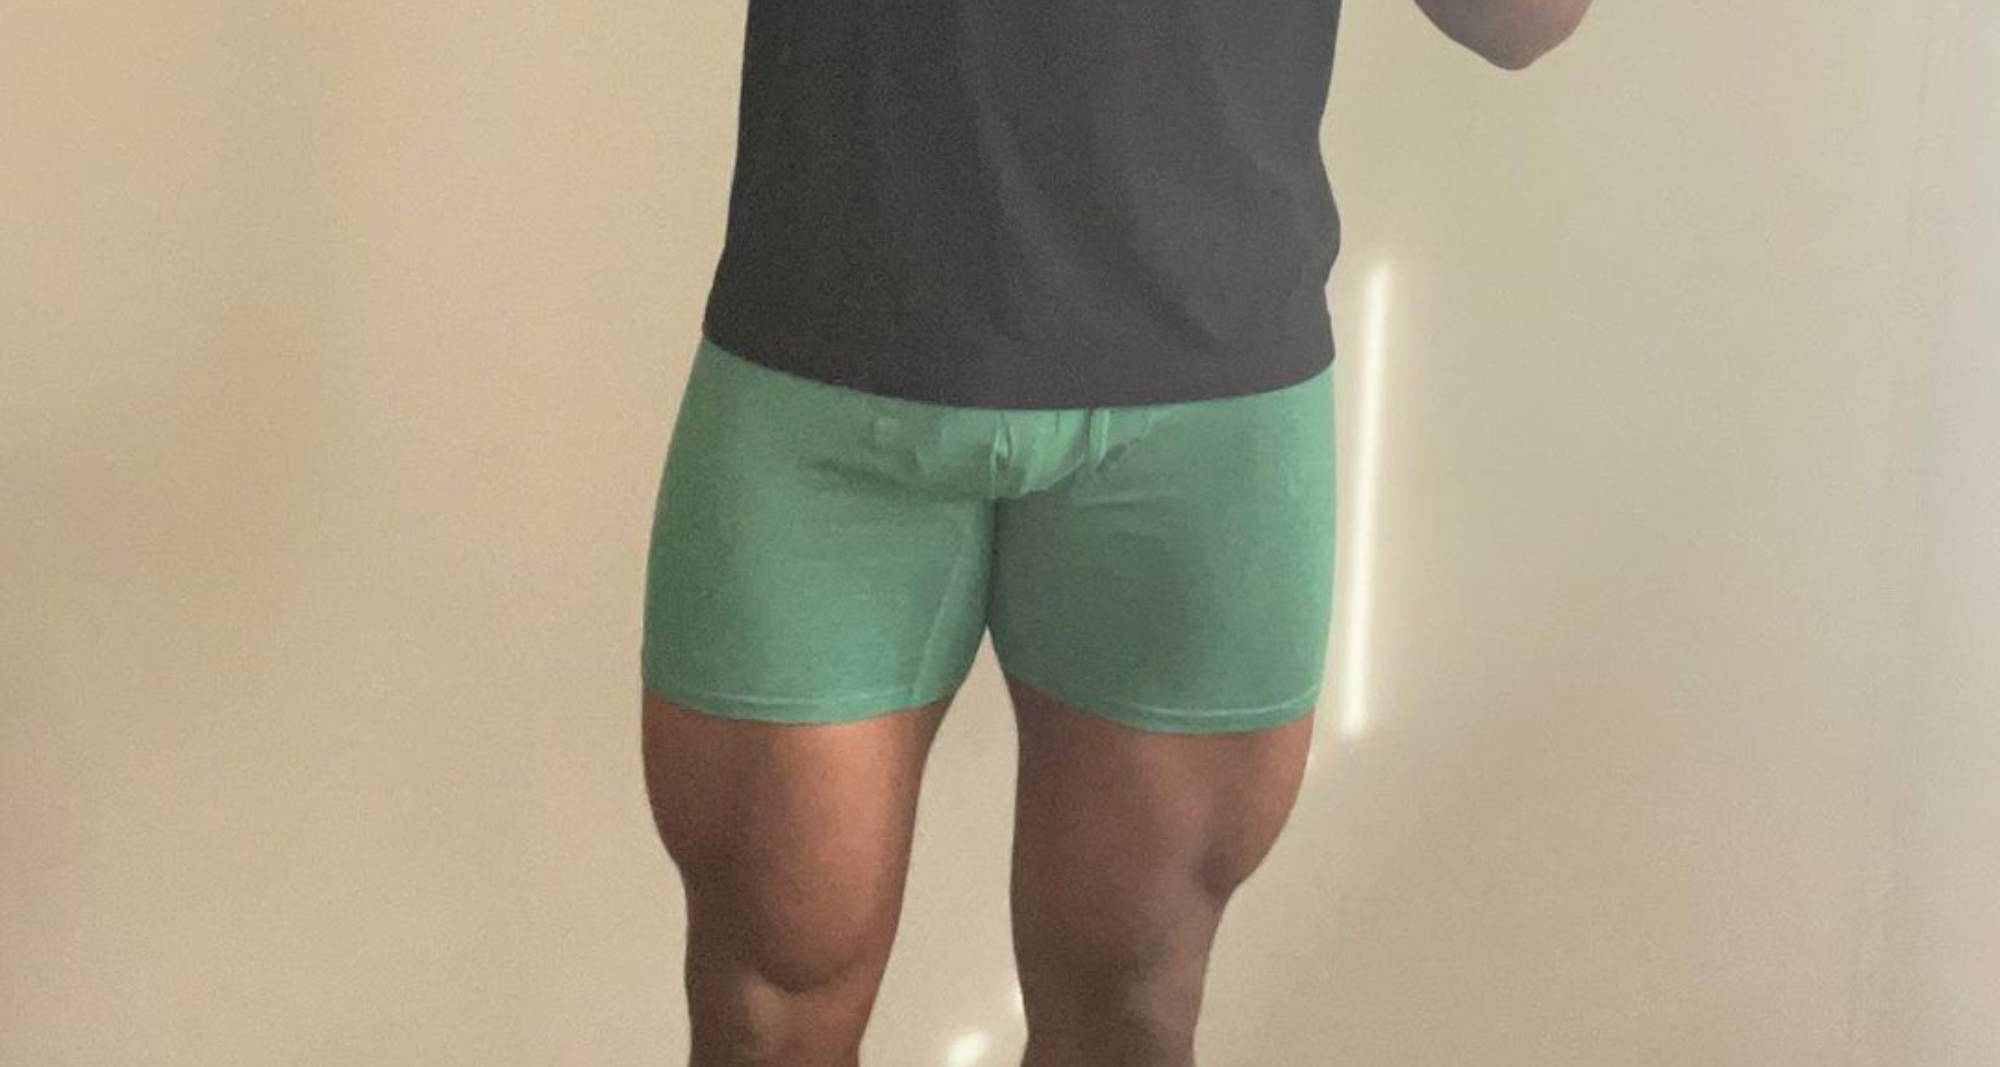 man wearing a black t-shirt and green boxer briefs holding up a peace sign and two other pairs of green undies